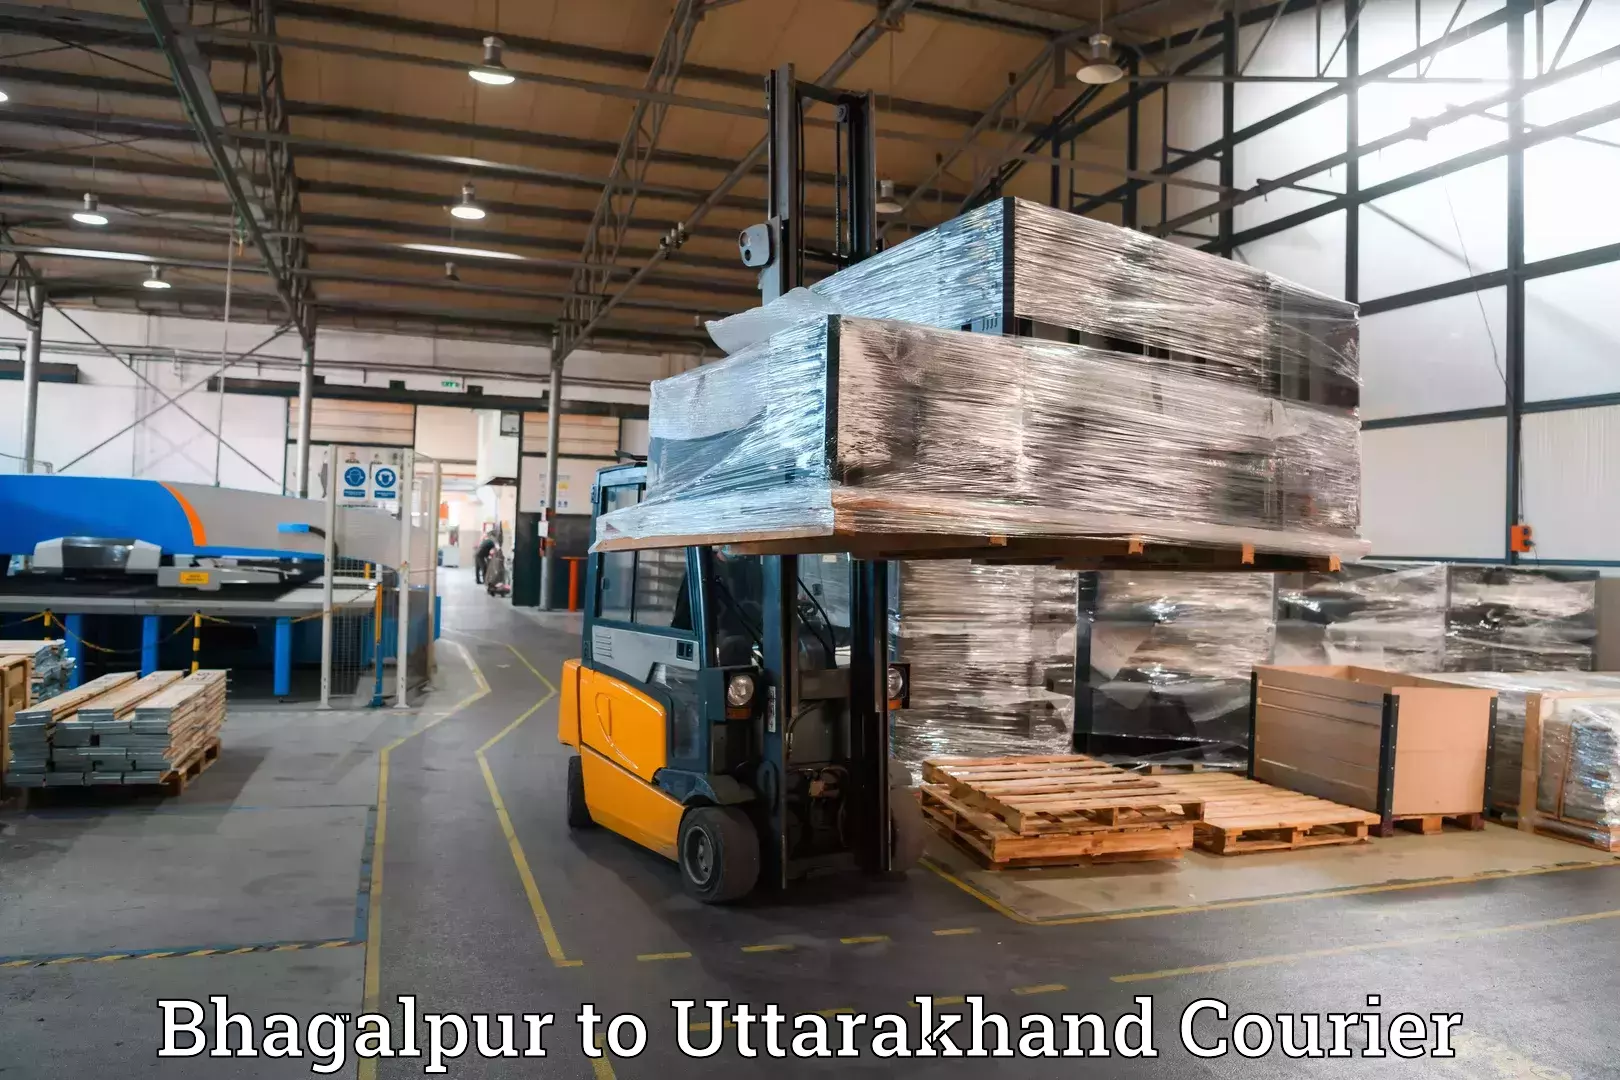 Baggage delivery technology in Bhagalpur to Lohaghat